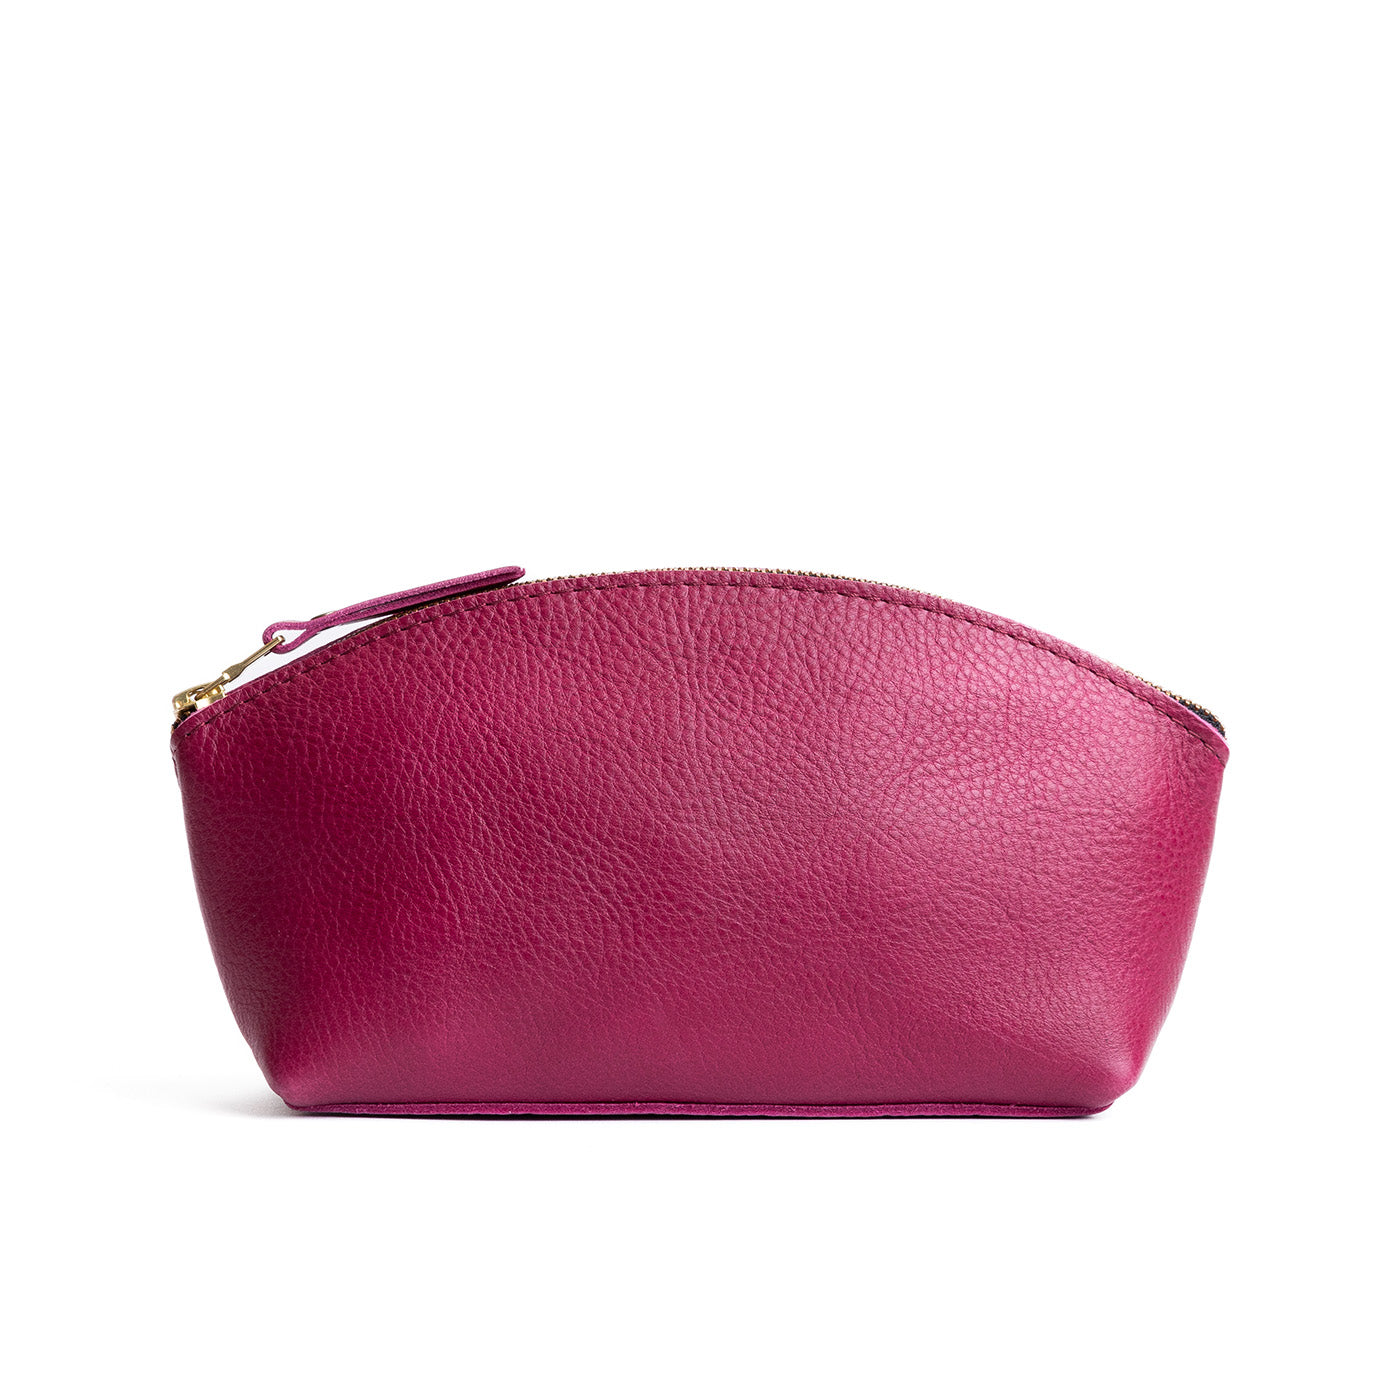 Cosmo*Eclipse | Spacious leather makeup bag with curved seams and top zipper